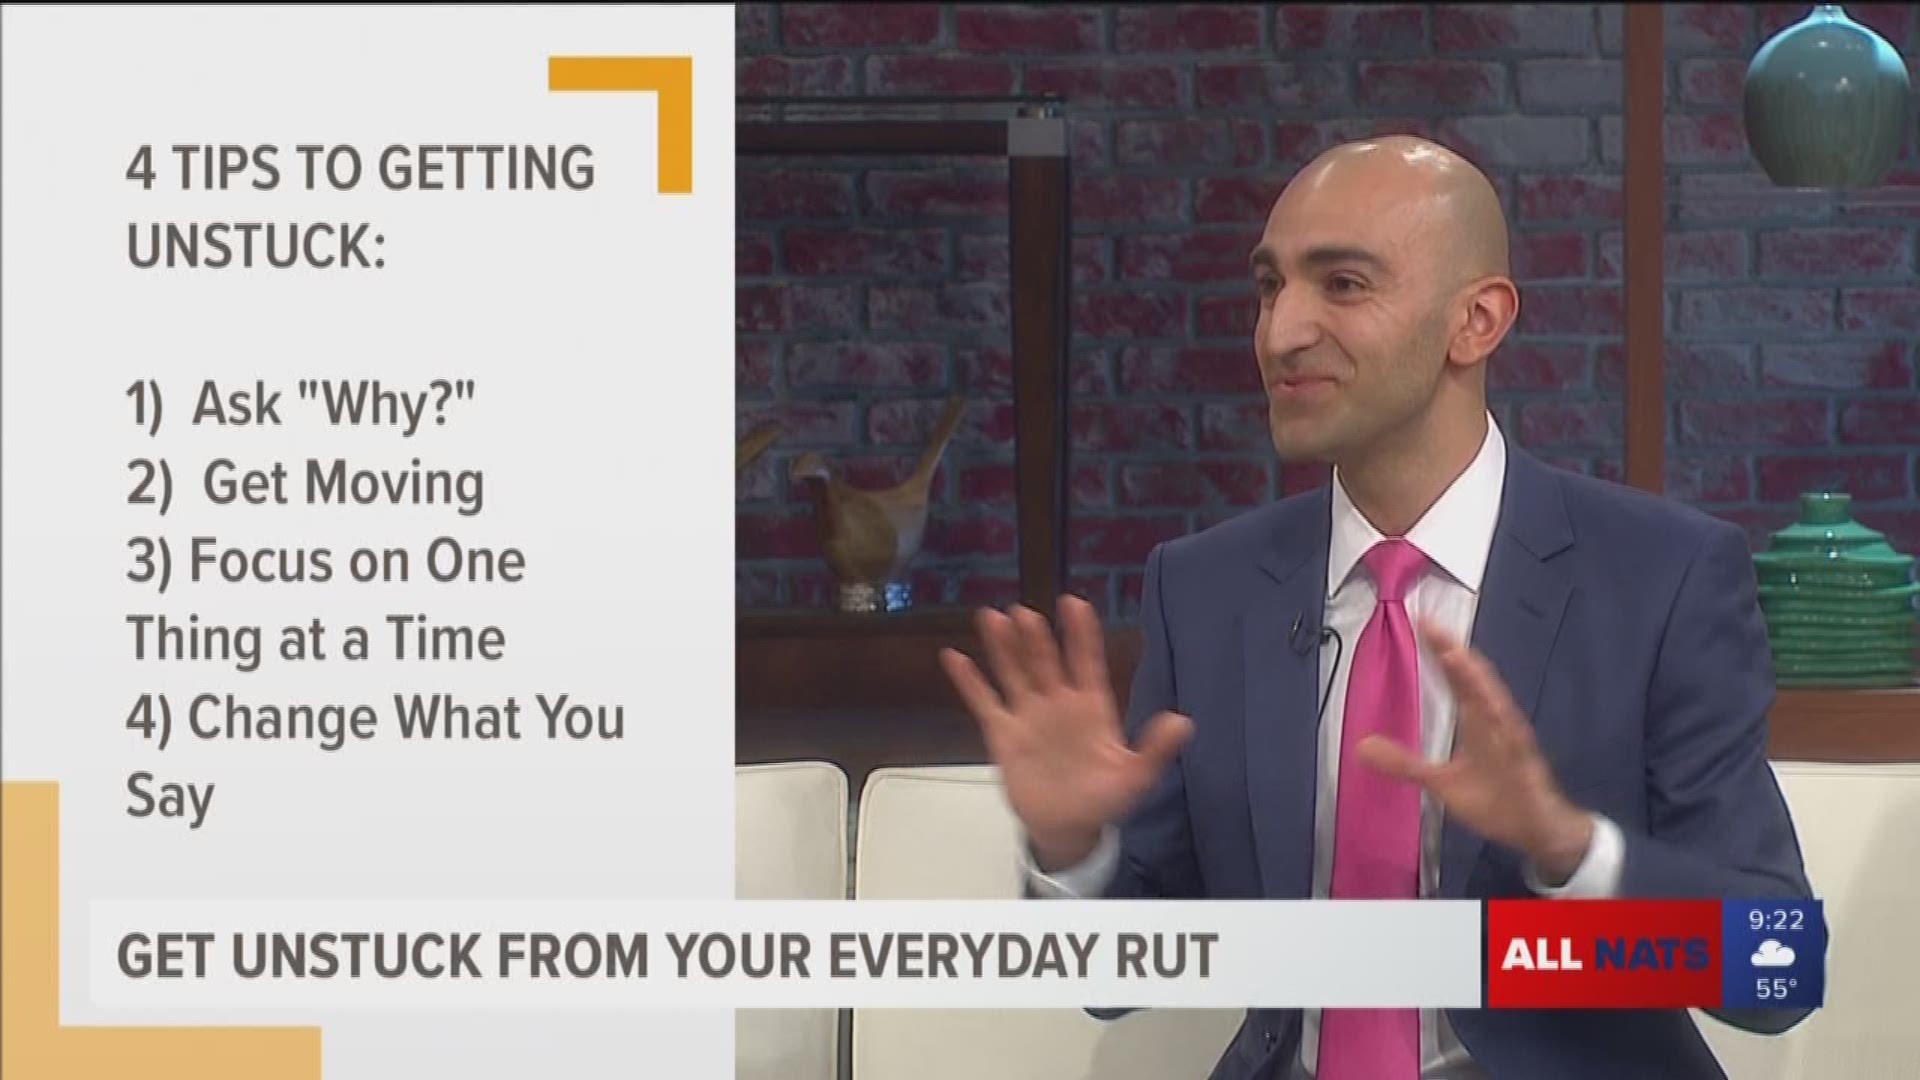 Bestselling author Leon Brie shares 4 tips from his book "How to Get Unstuck". His book helps you get out of your everyday rut.